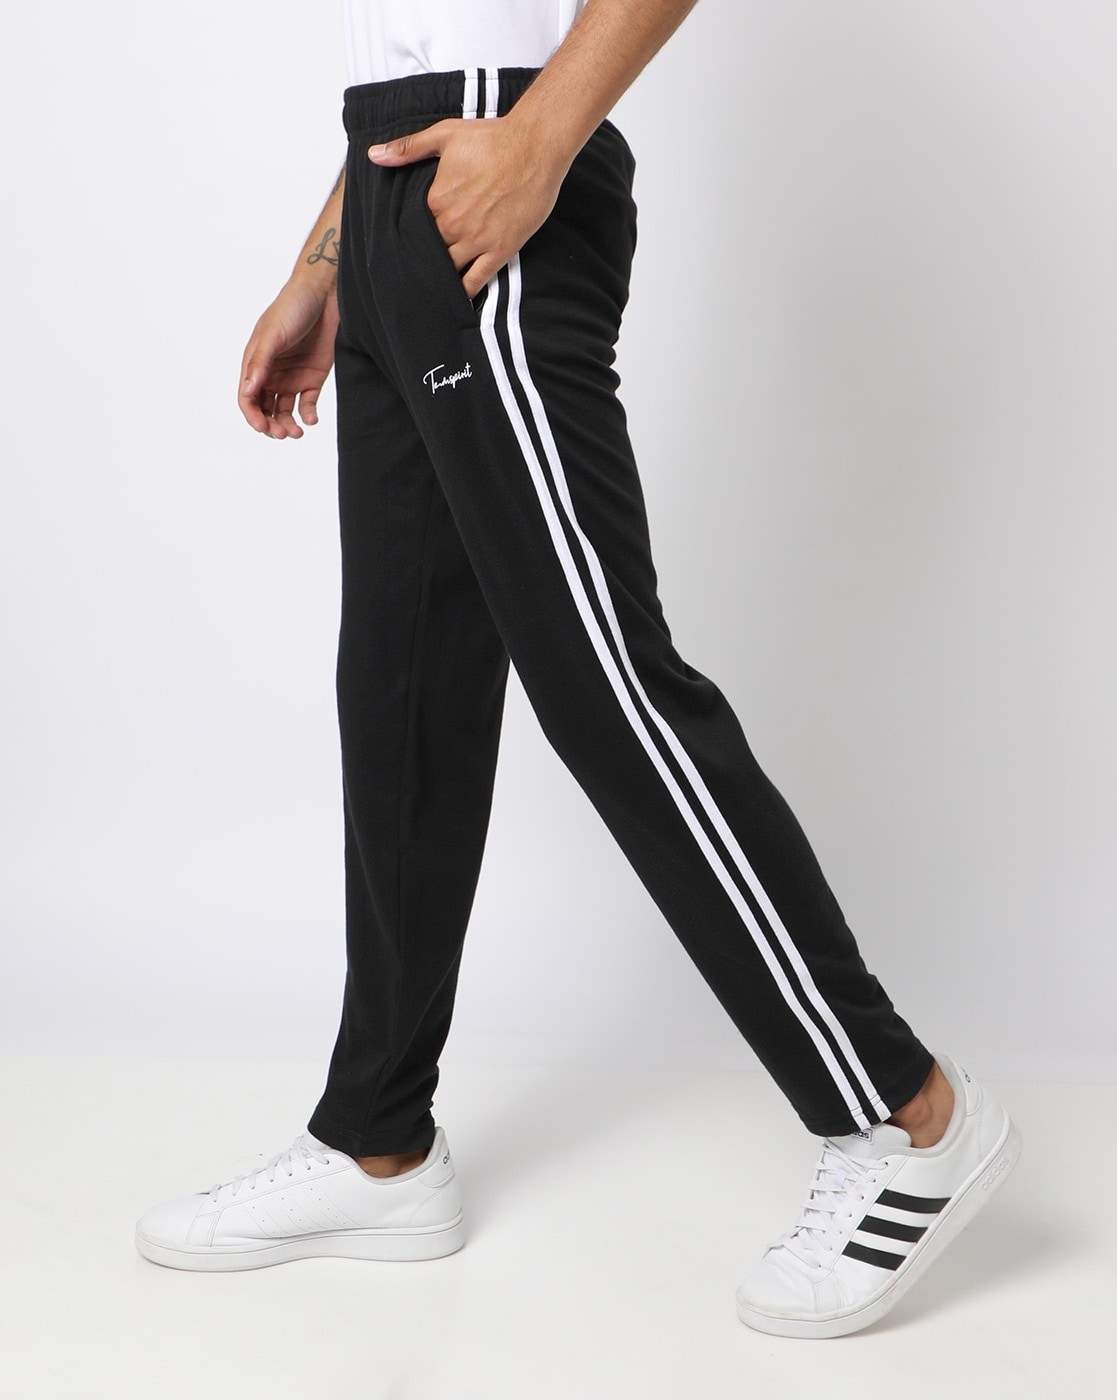 Pin by Allison on ADIDAS APPAREL | Mens outfits, Adidas originals mens,  Clothes